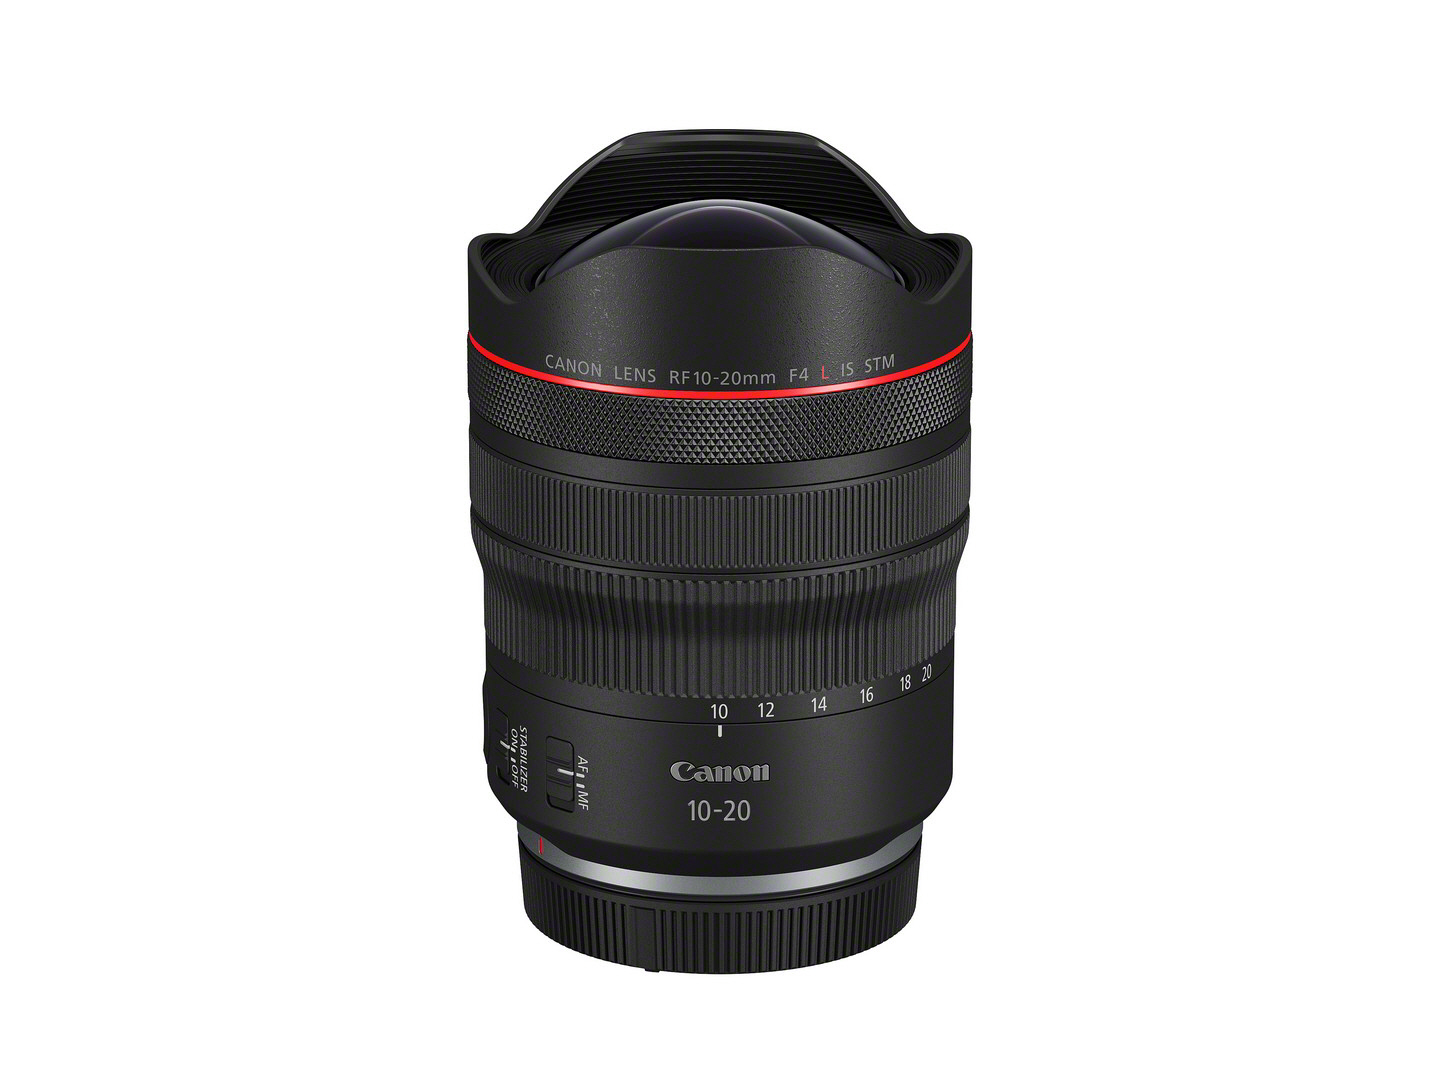 6182C005 CANON RF 10-20mm F4L IS STM Wide Angle Lens - Black